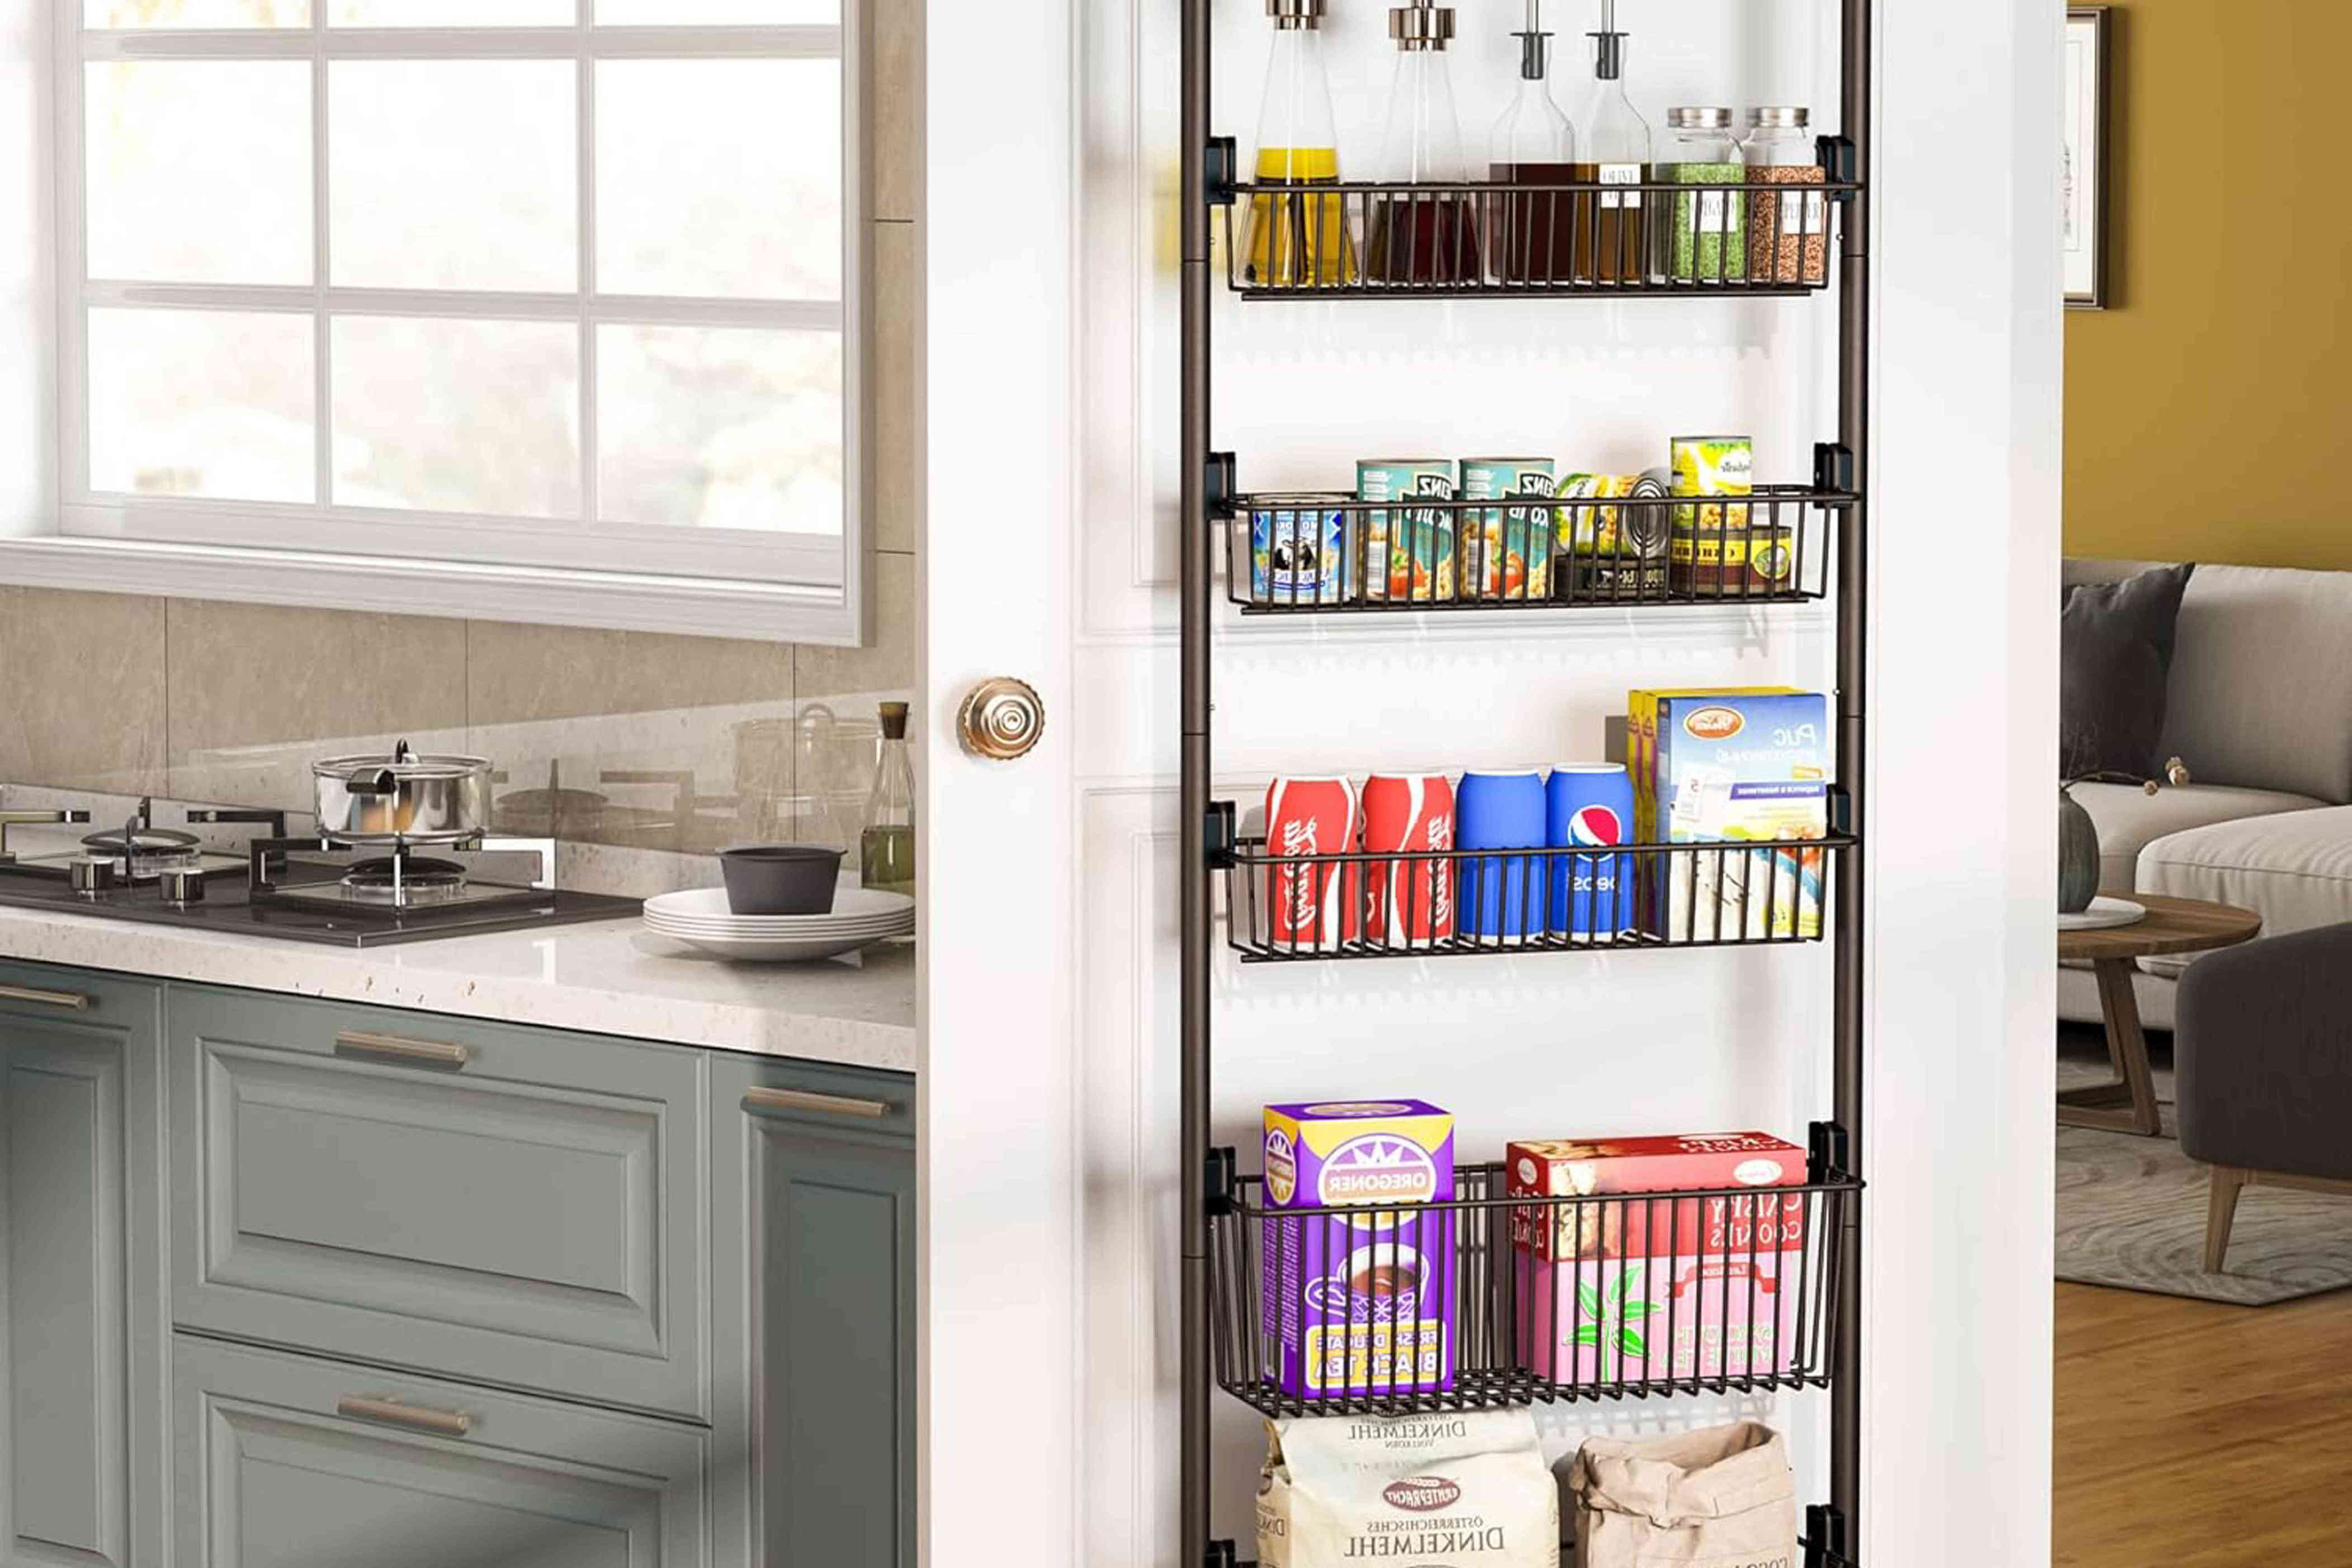 We Found Deals on Food Storage and Organization Products That Will ...